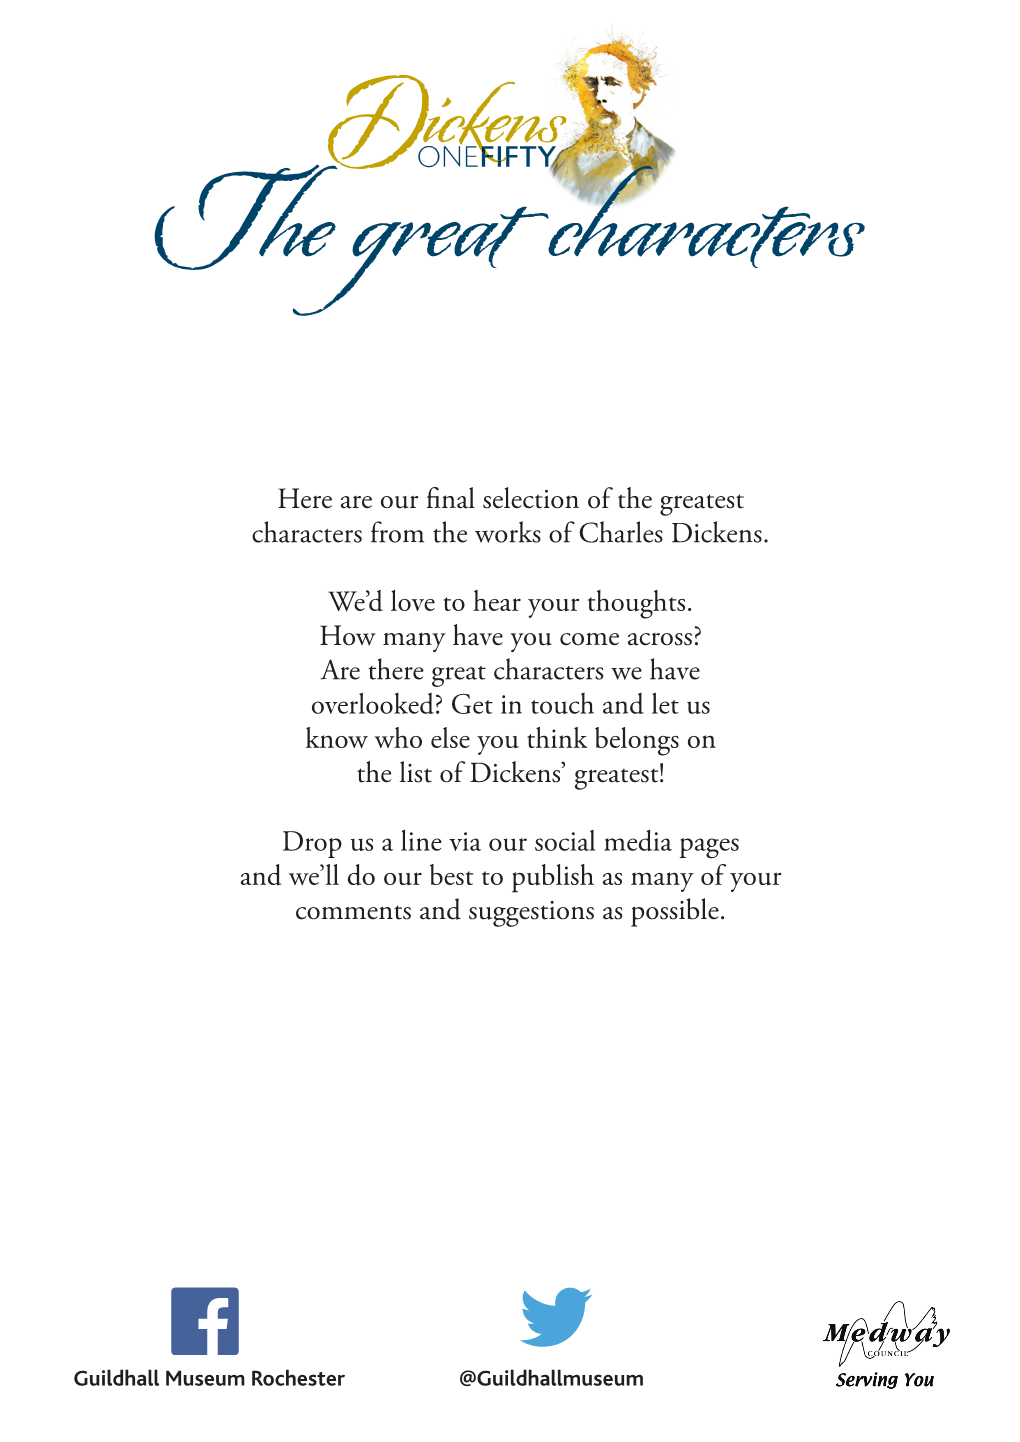 Here Are Our Final Selection of the Greatest Characters from the Works of Charles Dickens. We'd Love to Hear Your Thoughts. Ho